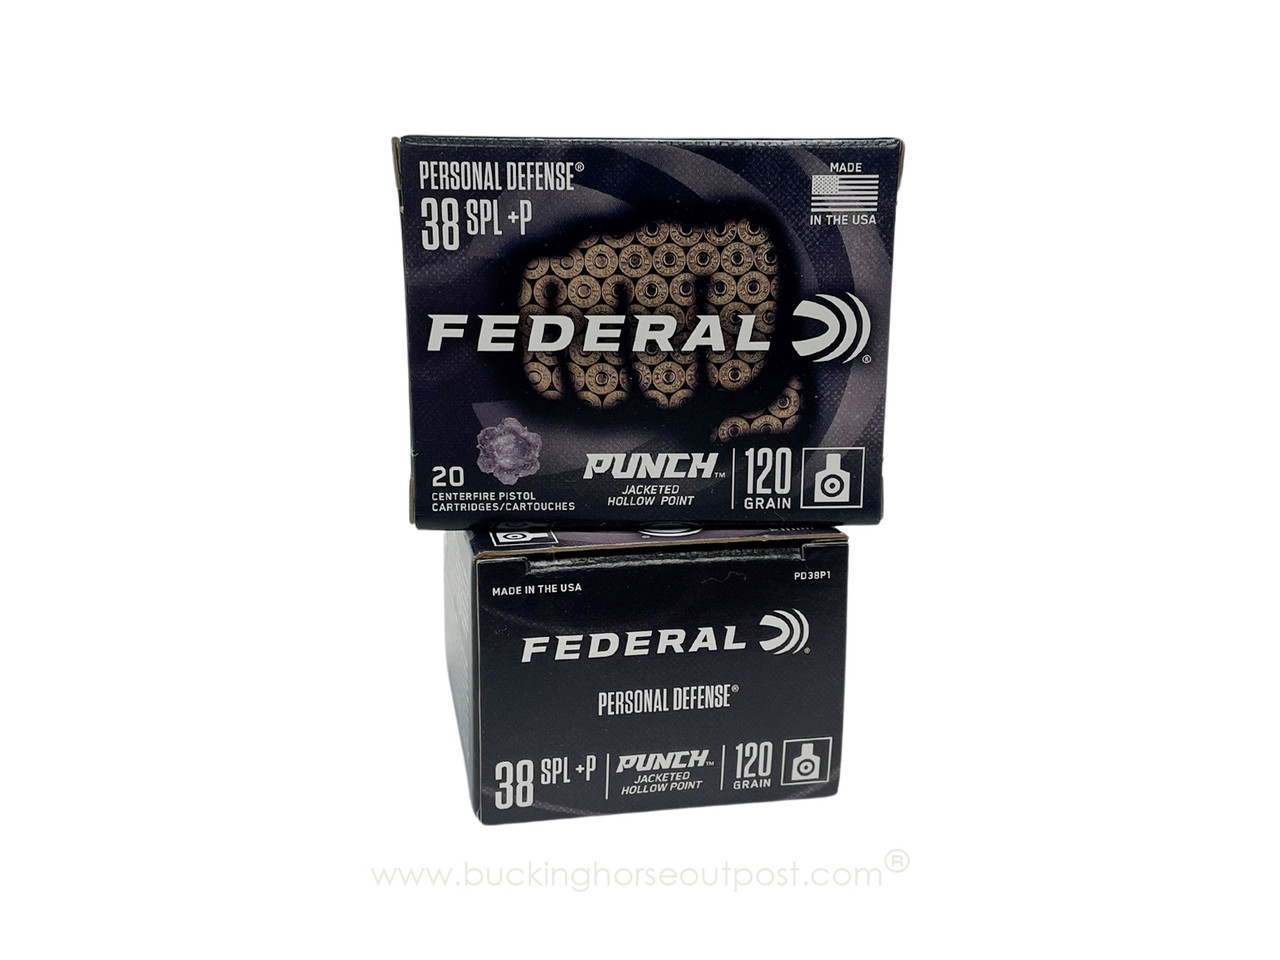 Federal Personal Defense Punch .38 Special (+P) 120 Grain Jacketed Hollow Point  20rds Per Box (PD38P1) - FREE SHIPPING ON ORDERS OVER $175